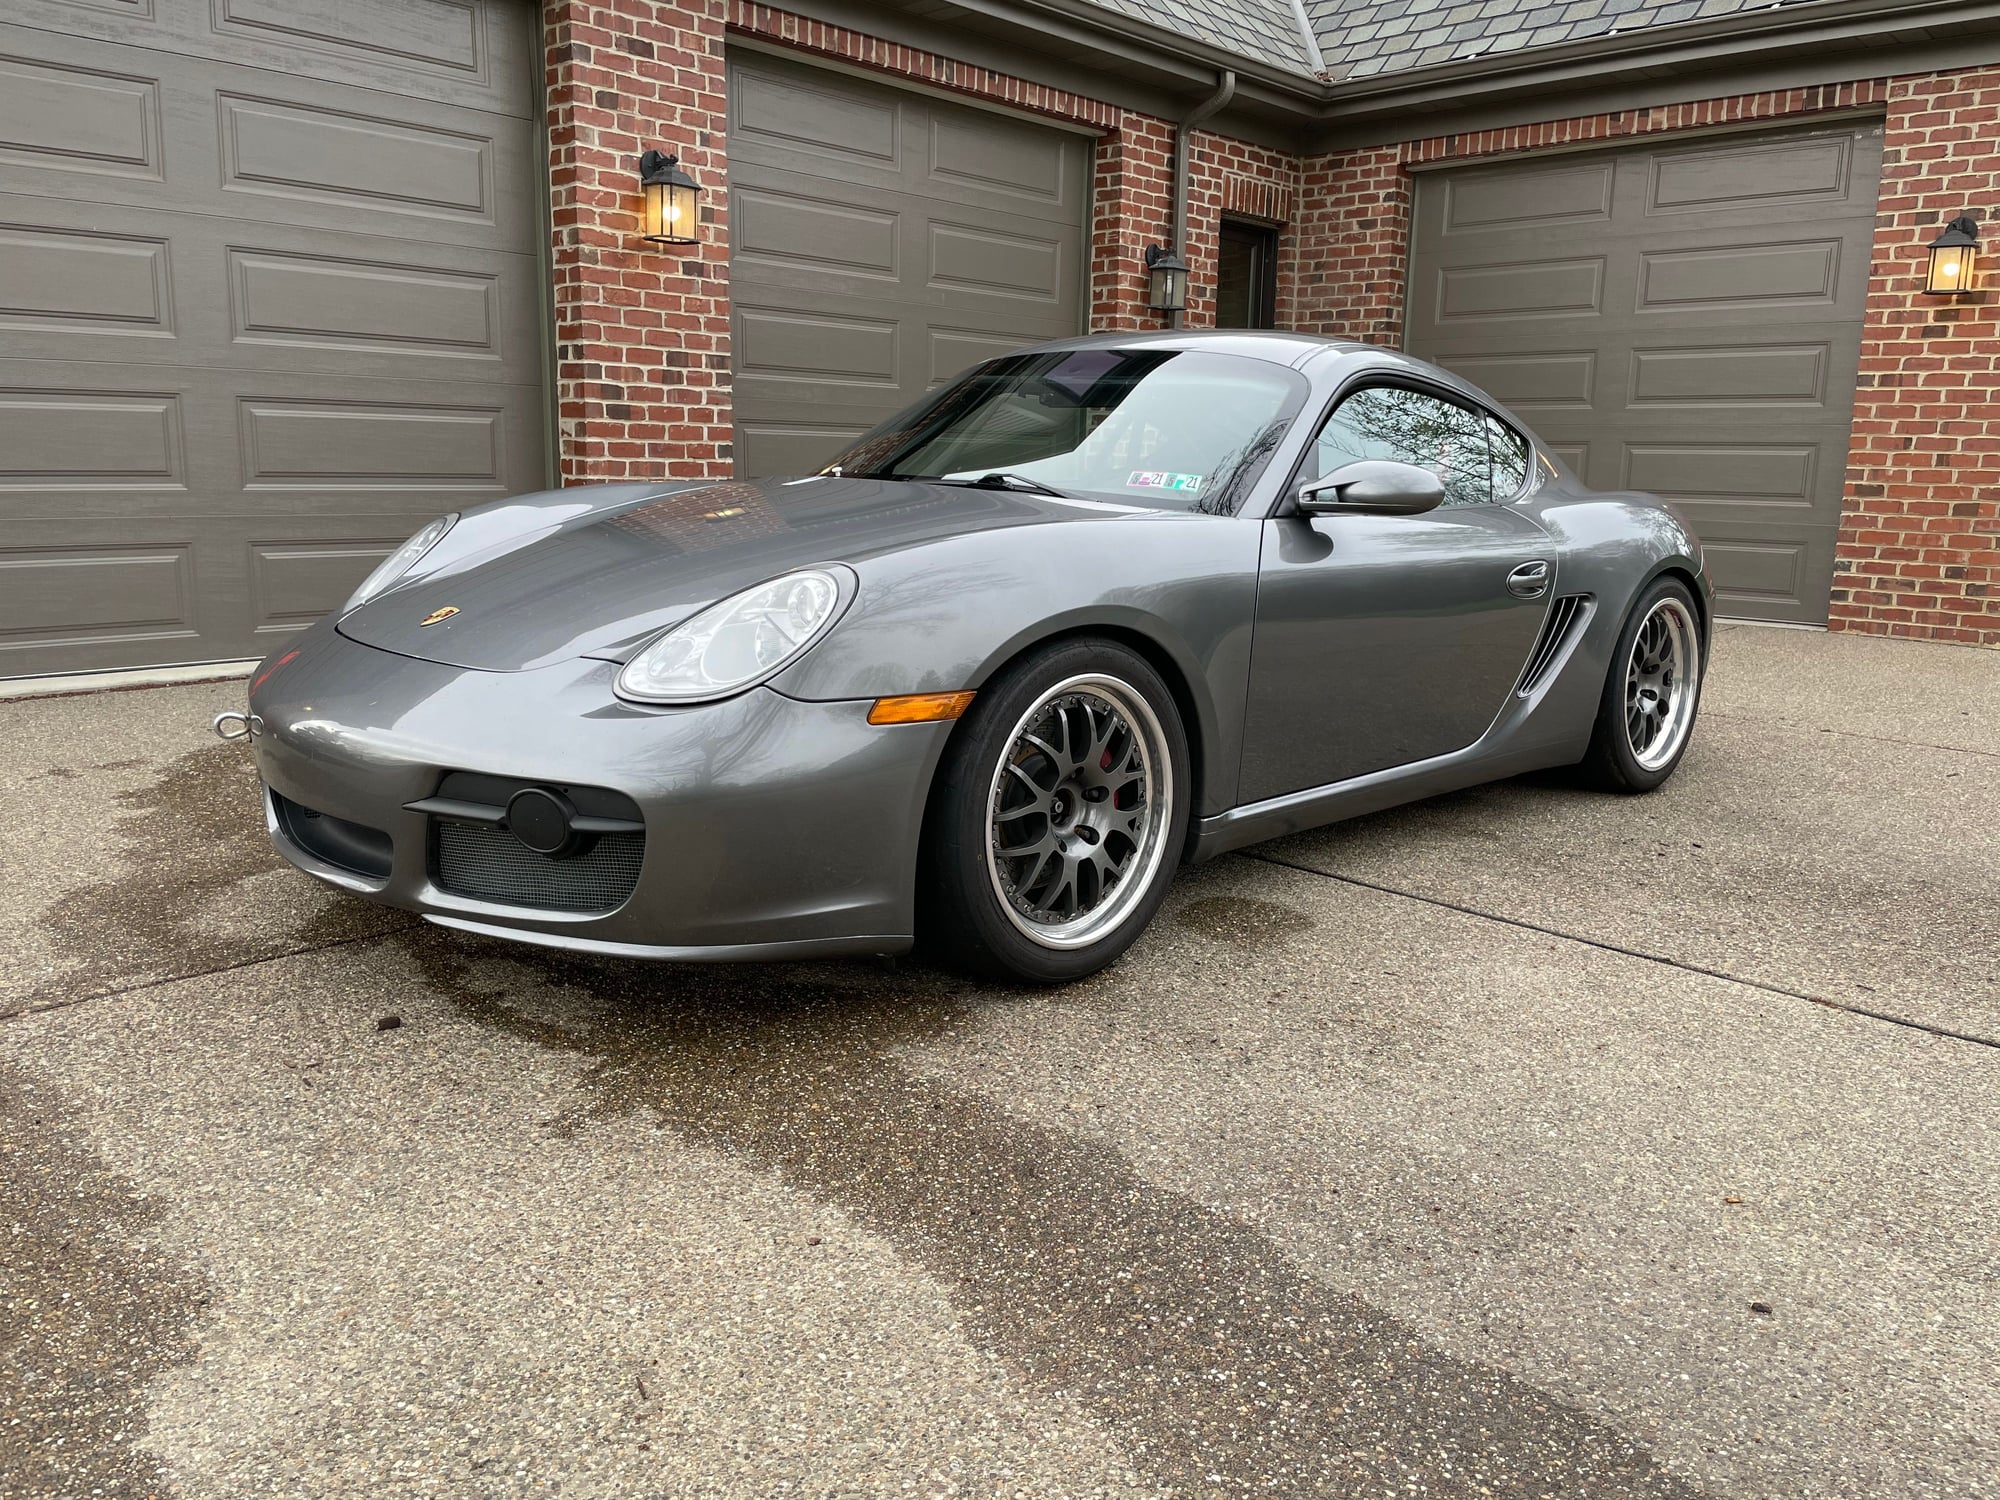 2008 Porsche Cayman - 2008 Porsche Cayman S Class H Race Car $38k OBO Pennsylvania - Used - VIN Wp0ab29878u782854 - 16,511 Miles - 6 cyl - 2WD - Manual - Coupe - Gray - Pgh, PA 15241, United States